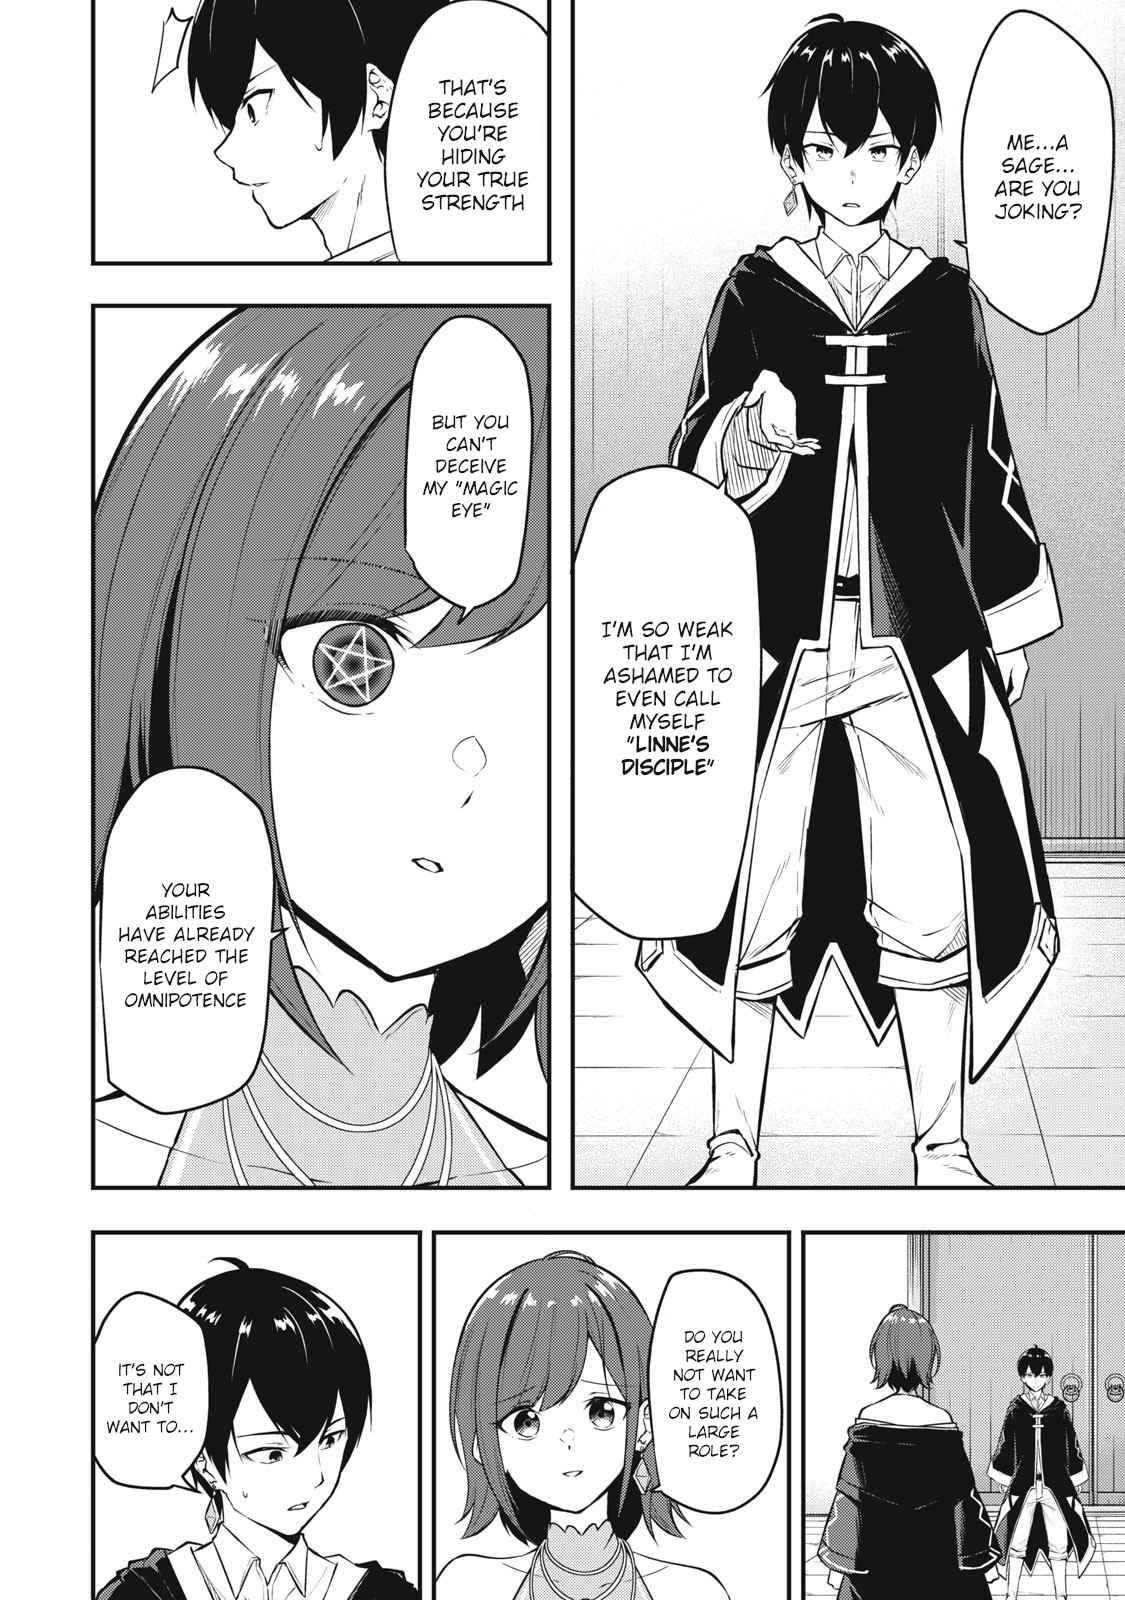 The Last Sage Of The Imperial Sword Academy - chapter 1 - #2